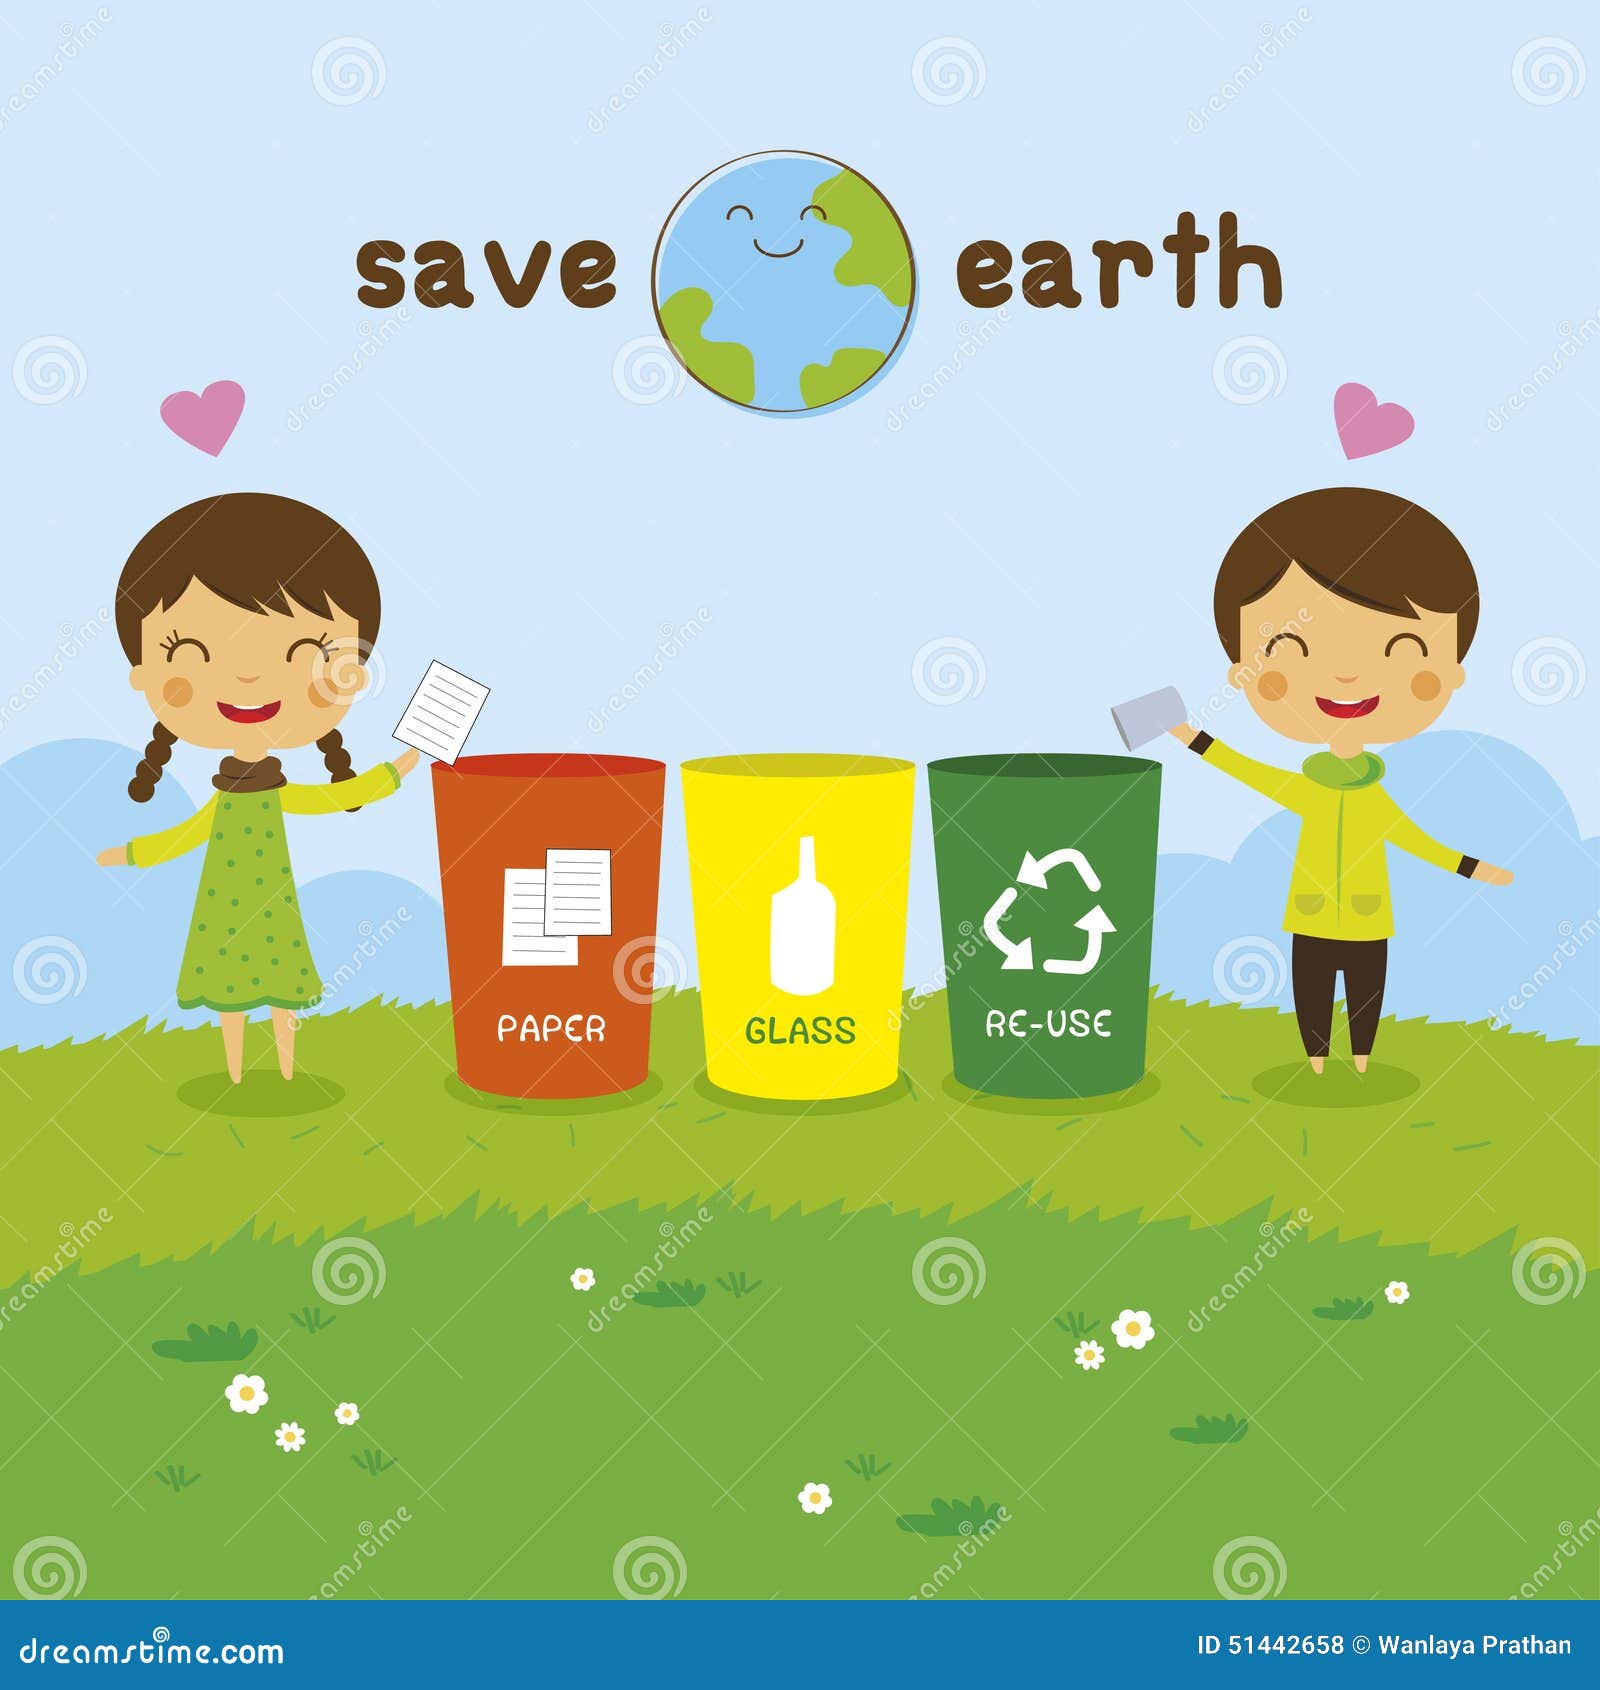 Save the Earth Ecology Concept Stock Vector - Illustration of economy,  creativity: 51442658